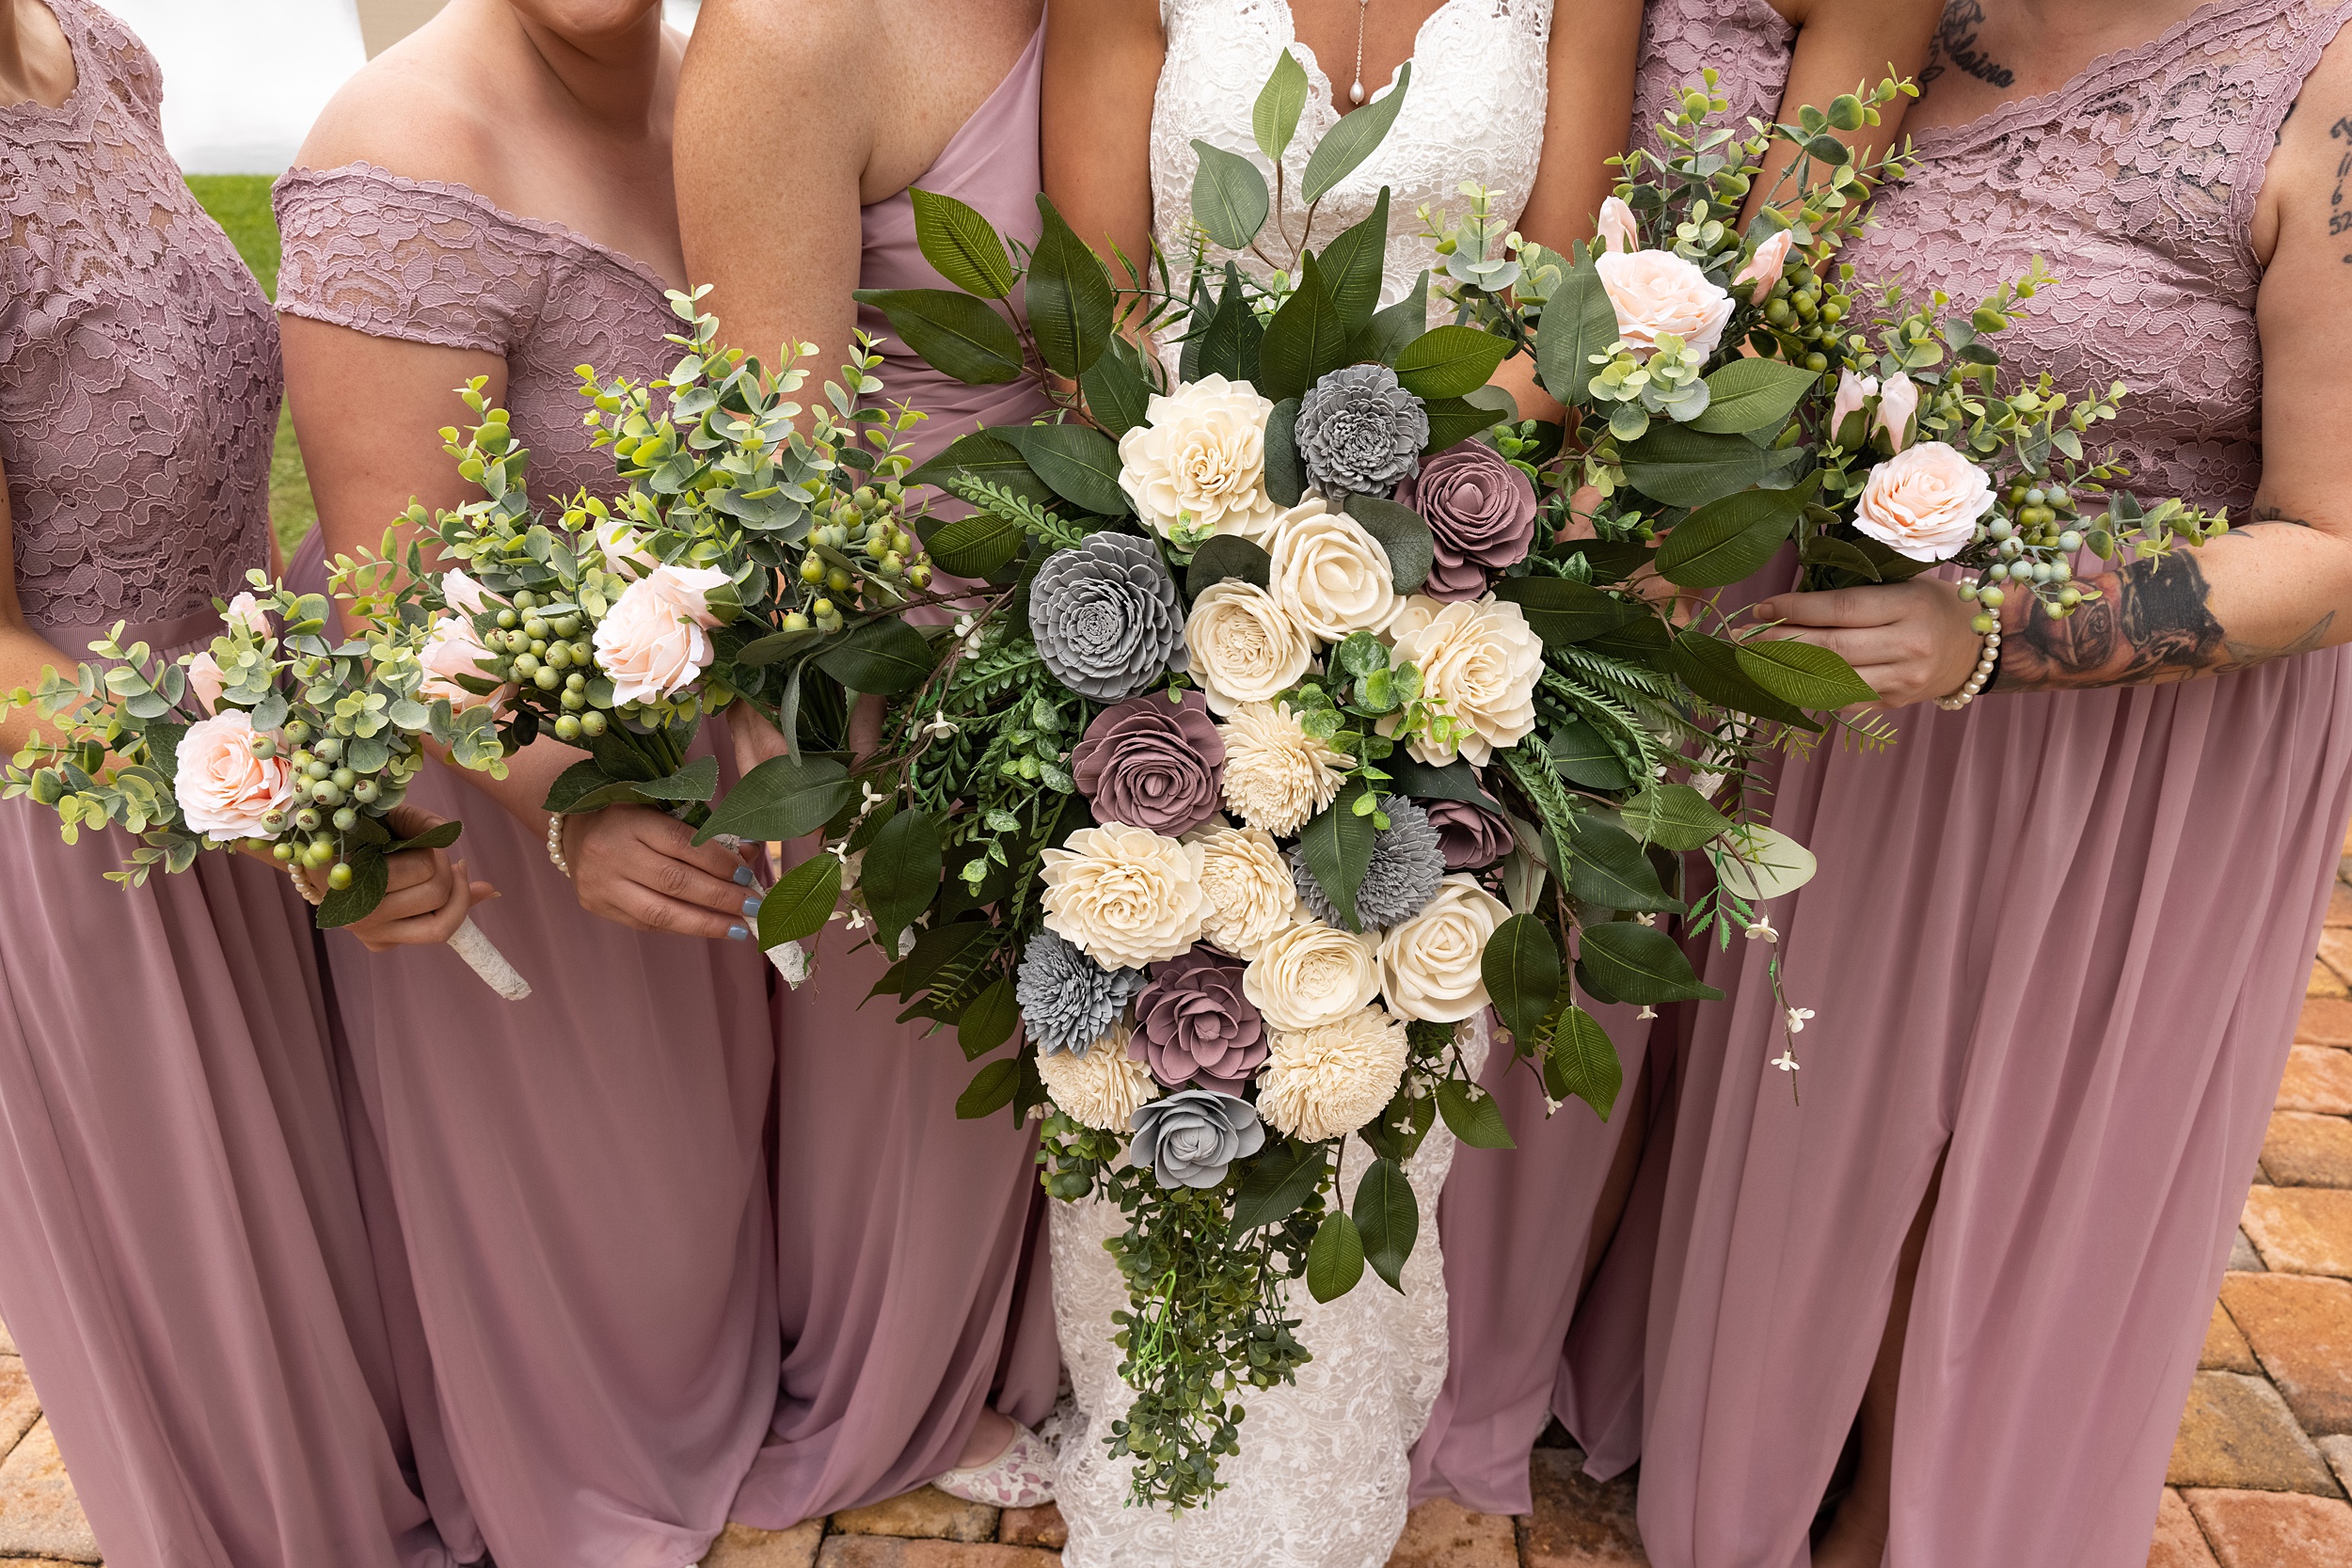 Details of a bride's large colorful bouquet with her bridesmaids